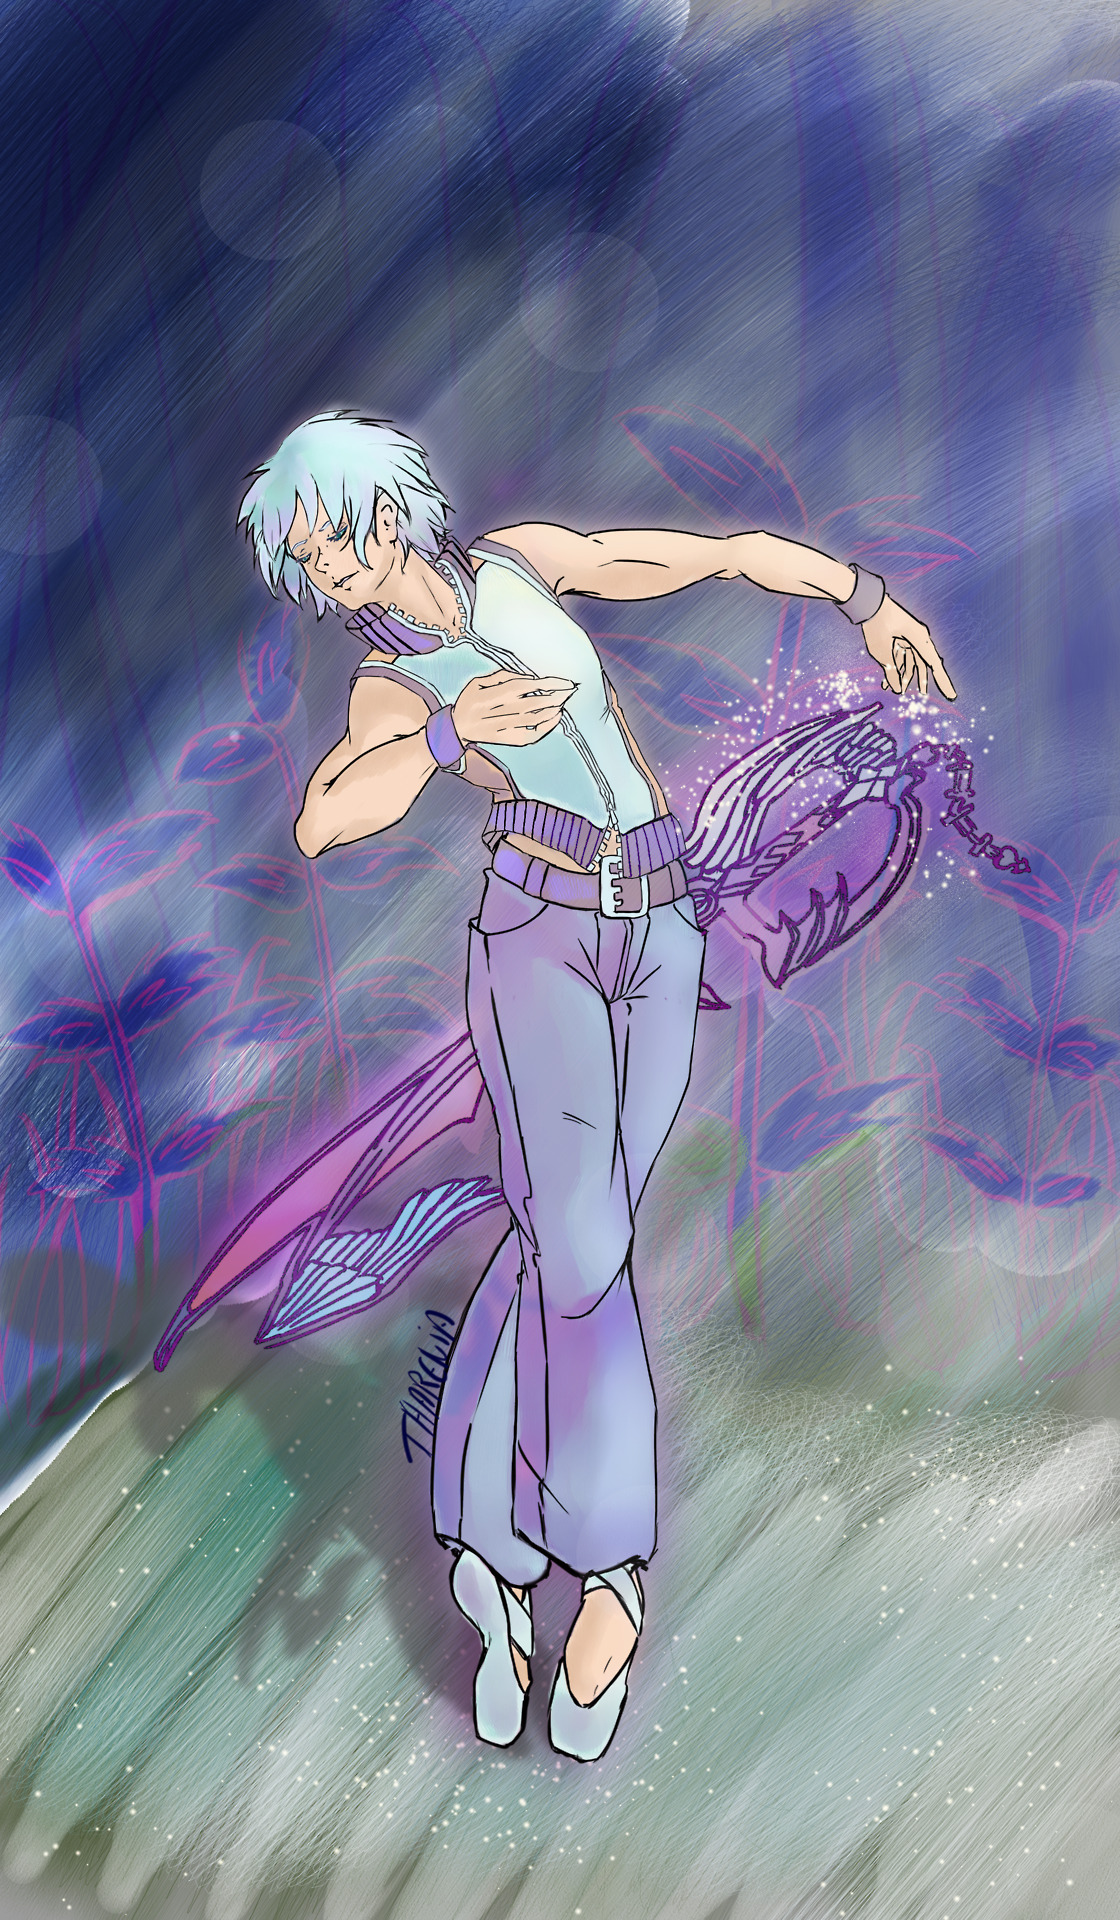 tharenia: I really love the idea of Aqua being an iceskater and Riku being a ballet